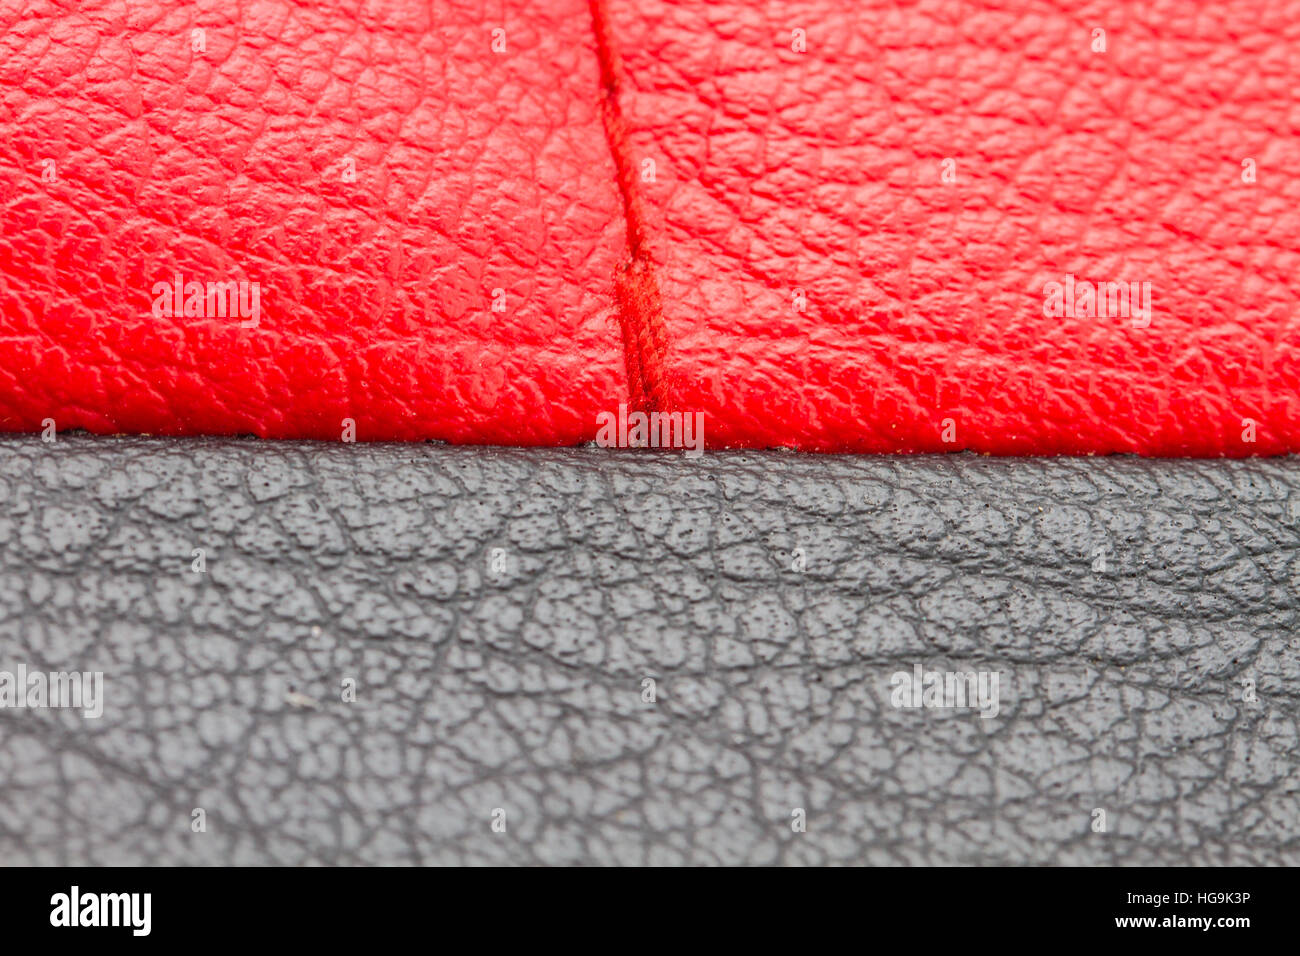 red and black natural leather, can be used as background Stock Photo